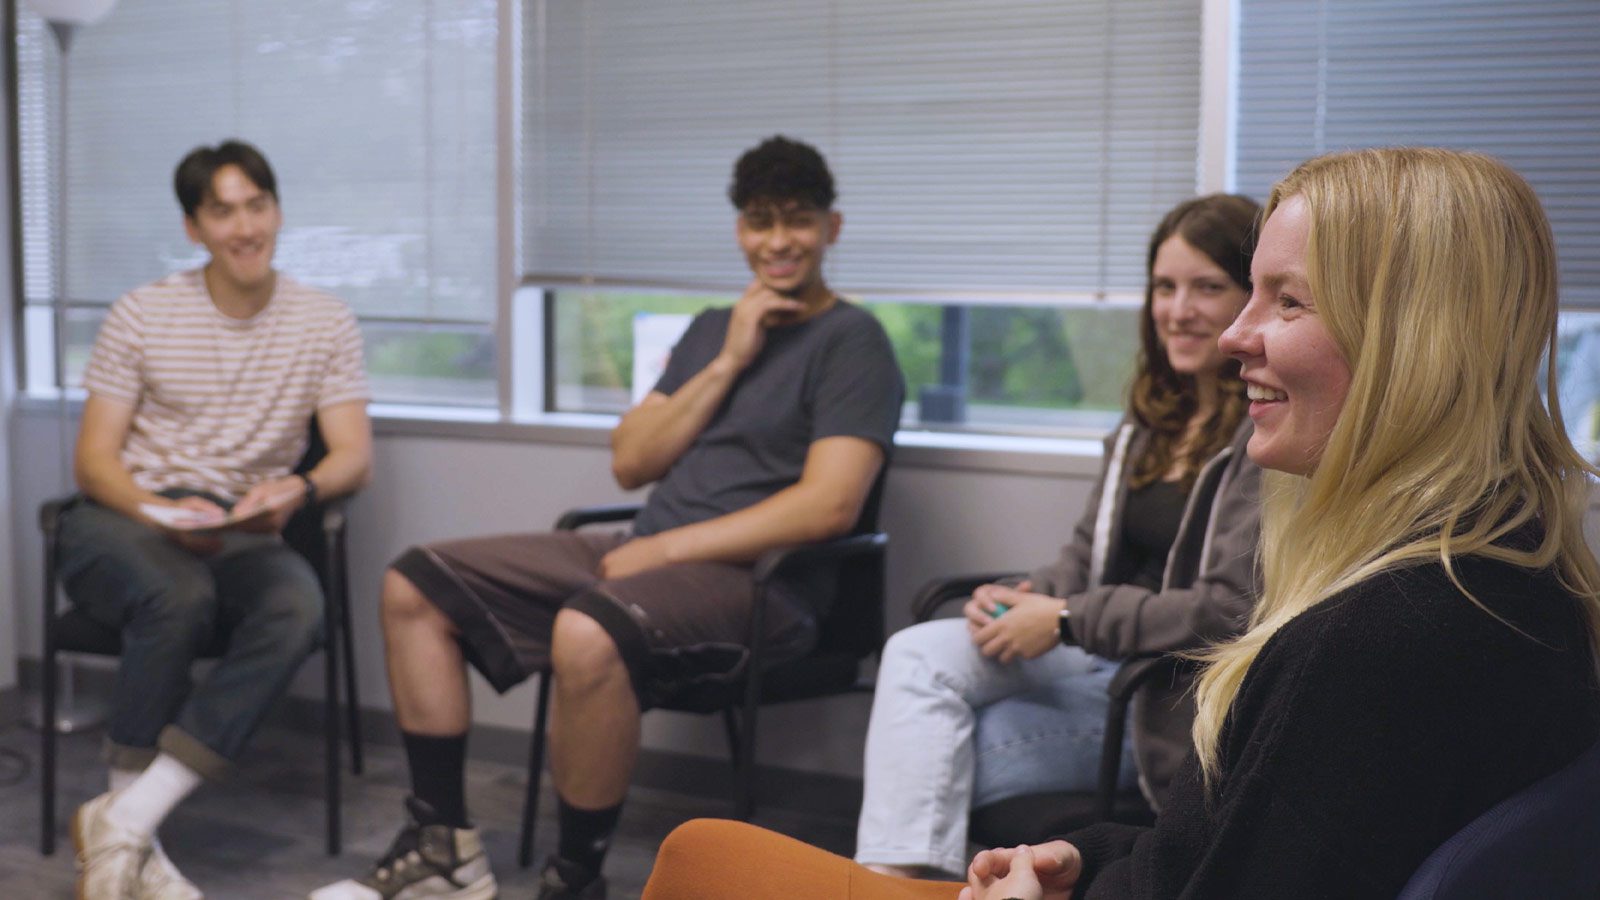 A group of smiling individuals in a casual office setting, engaging in a lively discussion.